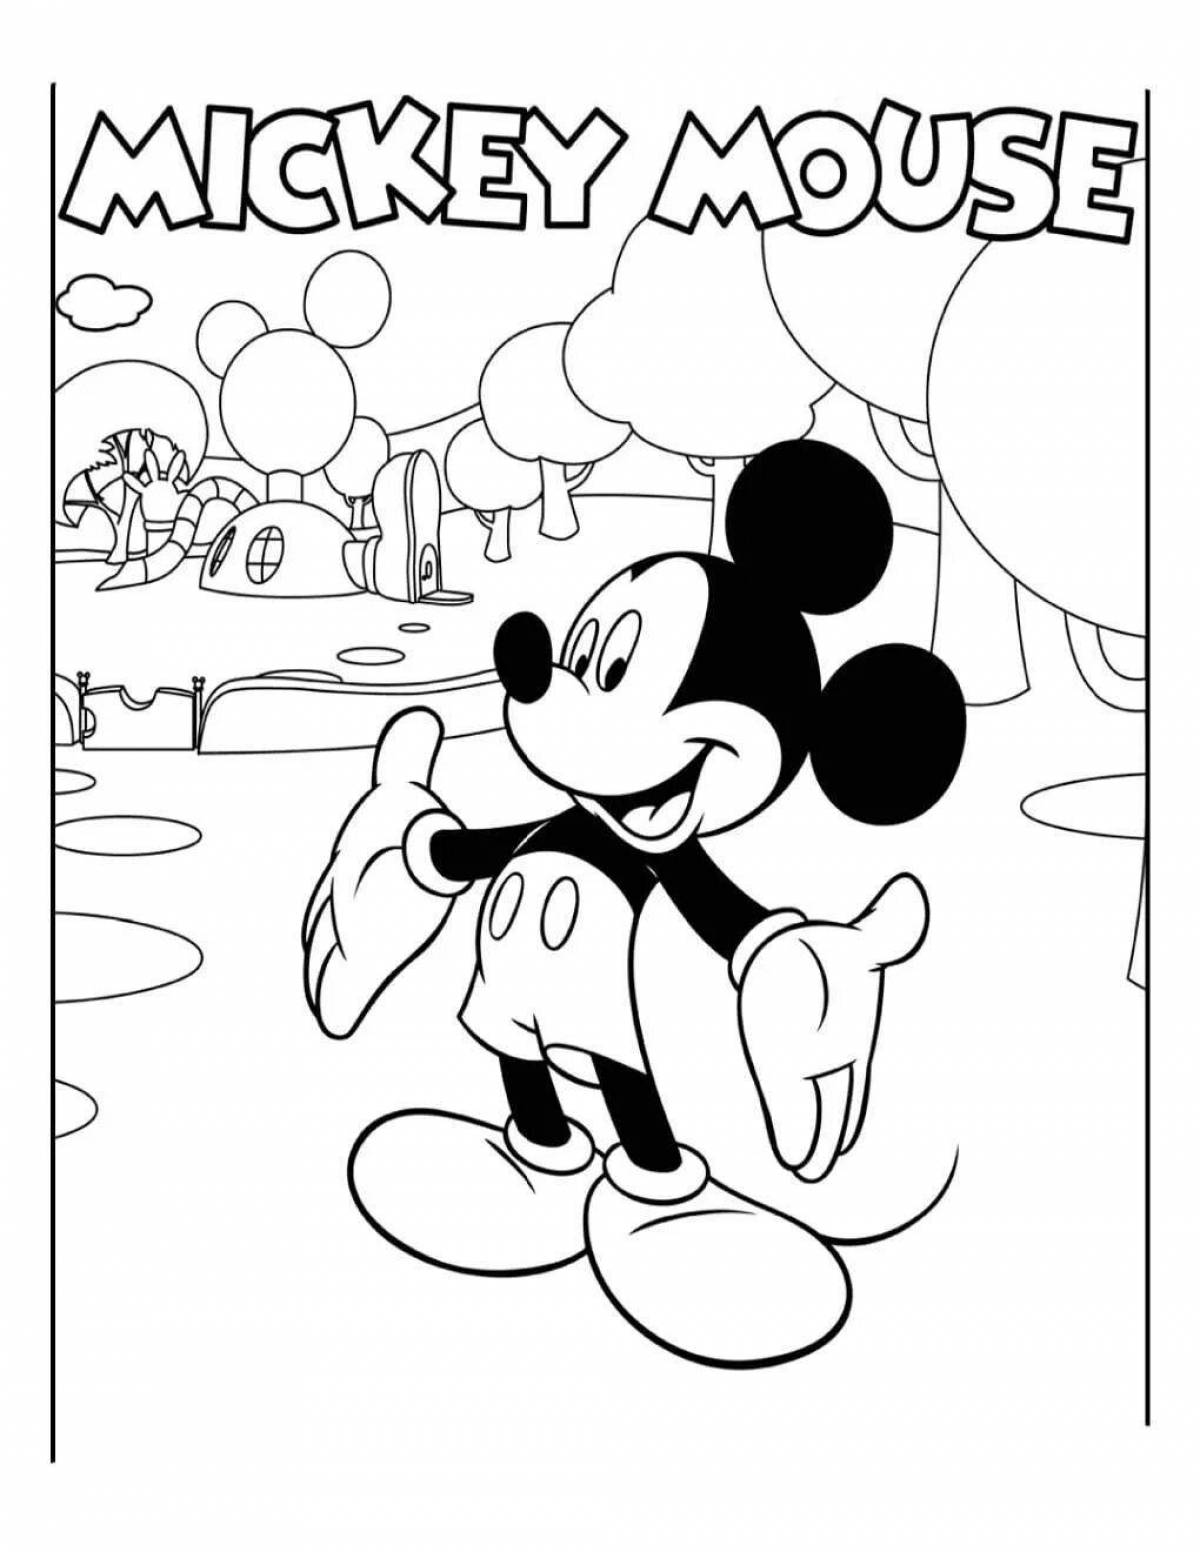 Incredible Coloring Might Mouse 1942